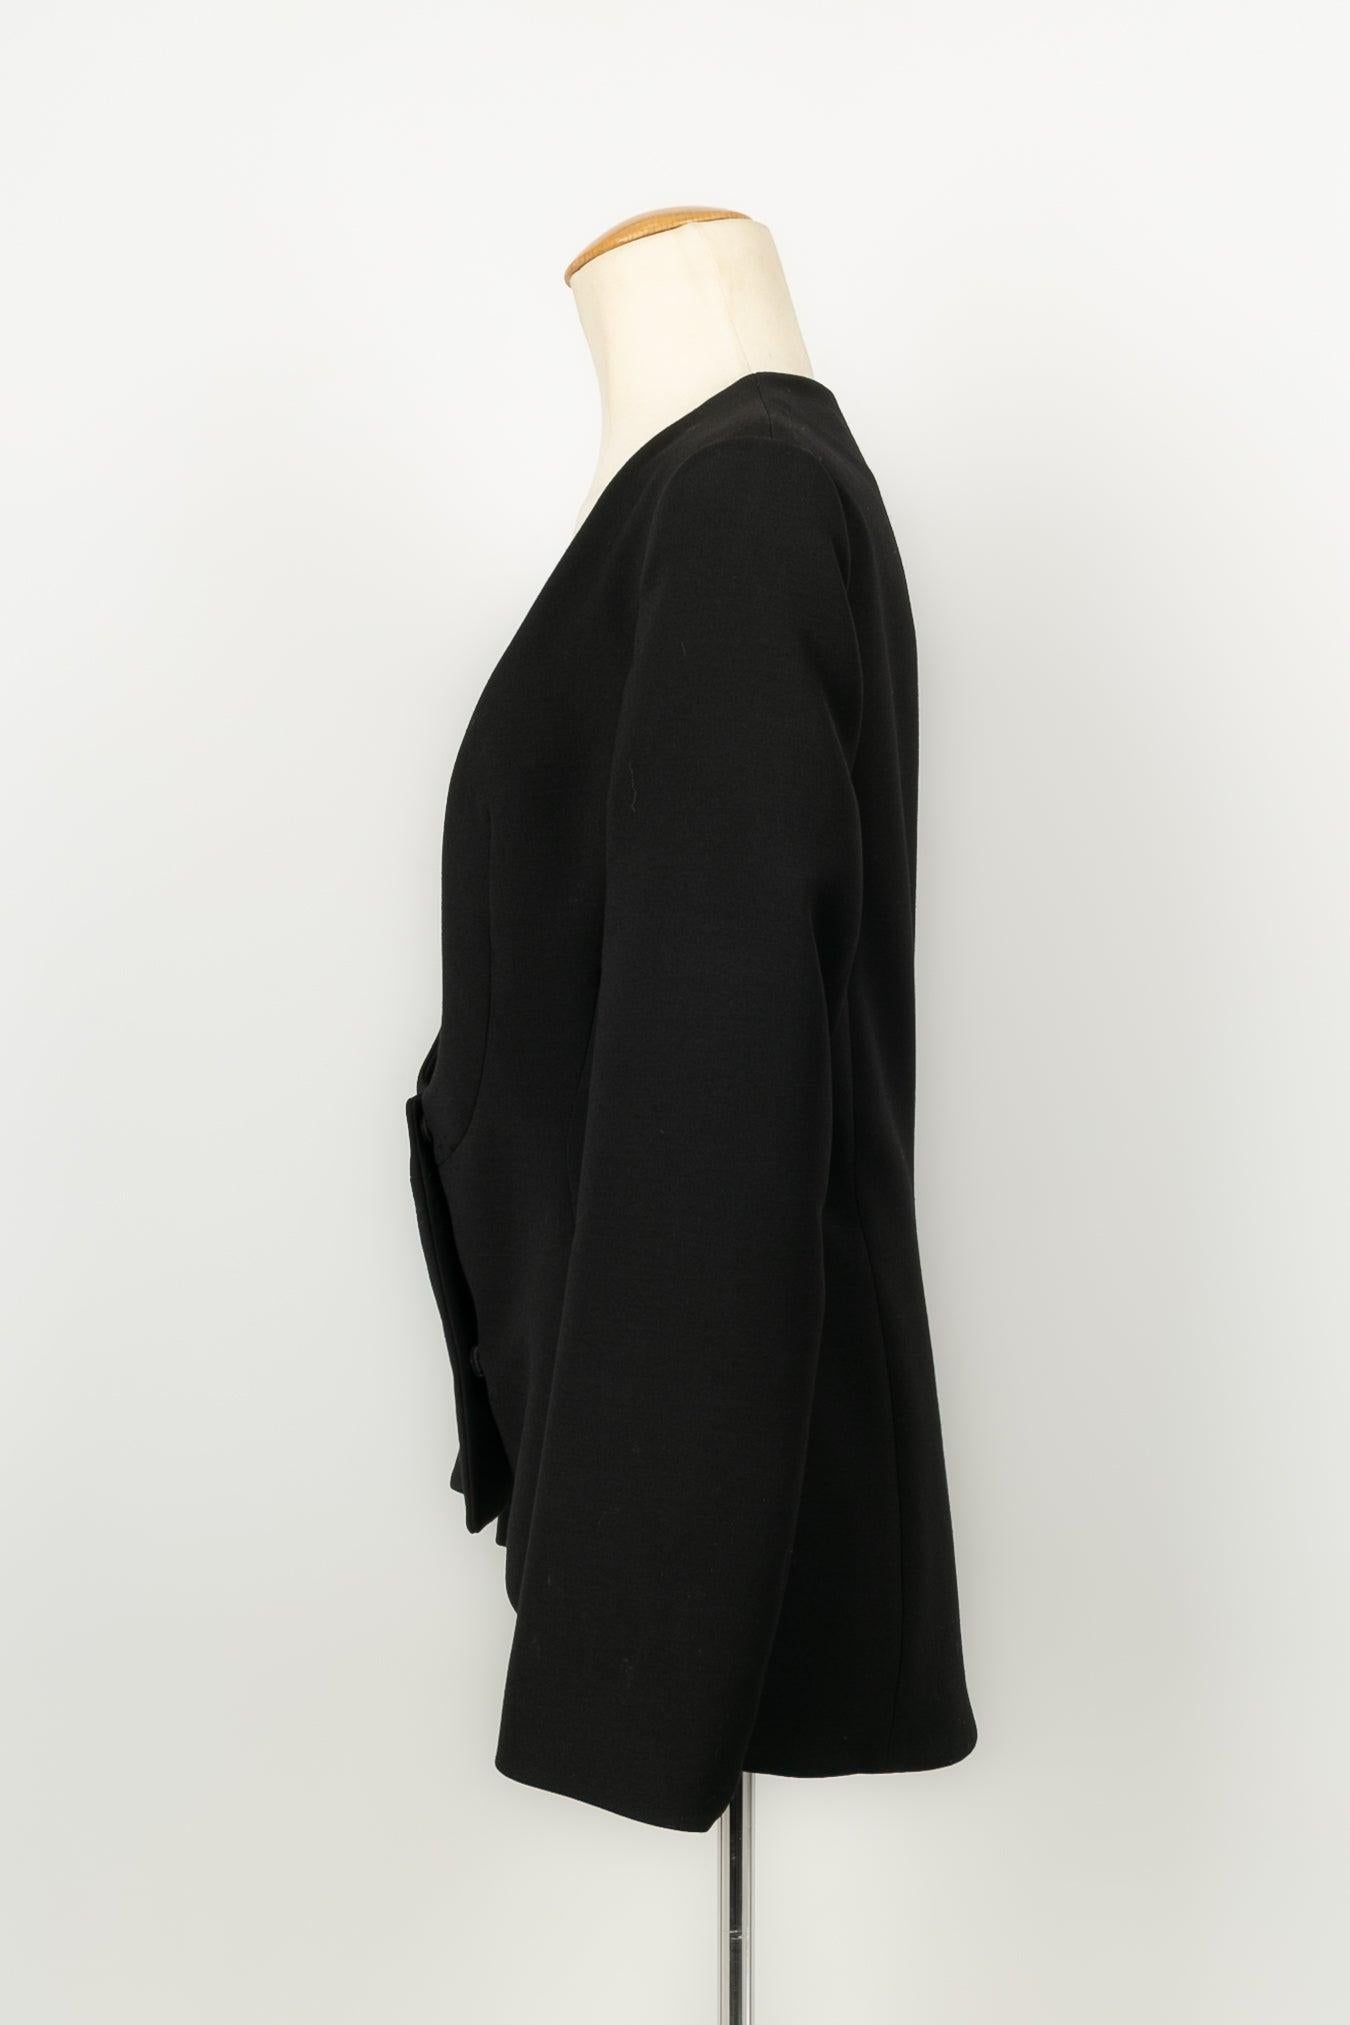 Dior - (Made in Italy) Jacket in black wool, very low cut. Collection 2003. Size 40FR.

Additional information: 
Dimensions: Shoulder width: 38 cm, Chest: 43 cm, Sleeve length: 54 cm, Length: 58 cm
Condition: Very good condition
Seller Ref number: